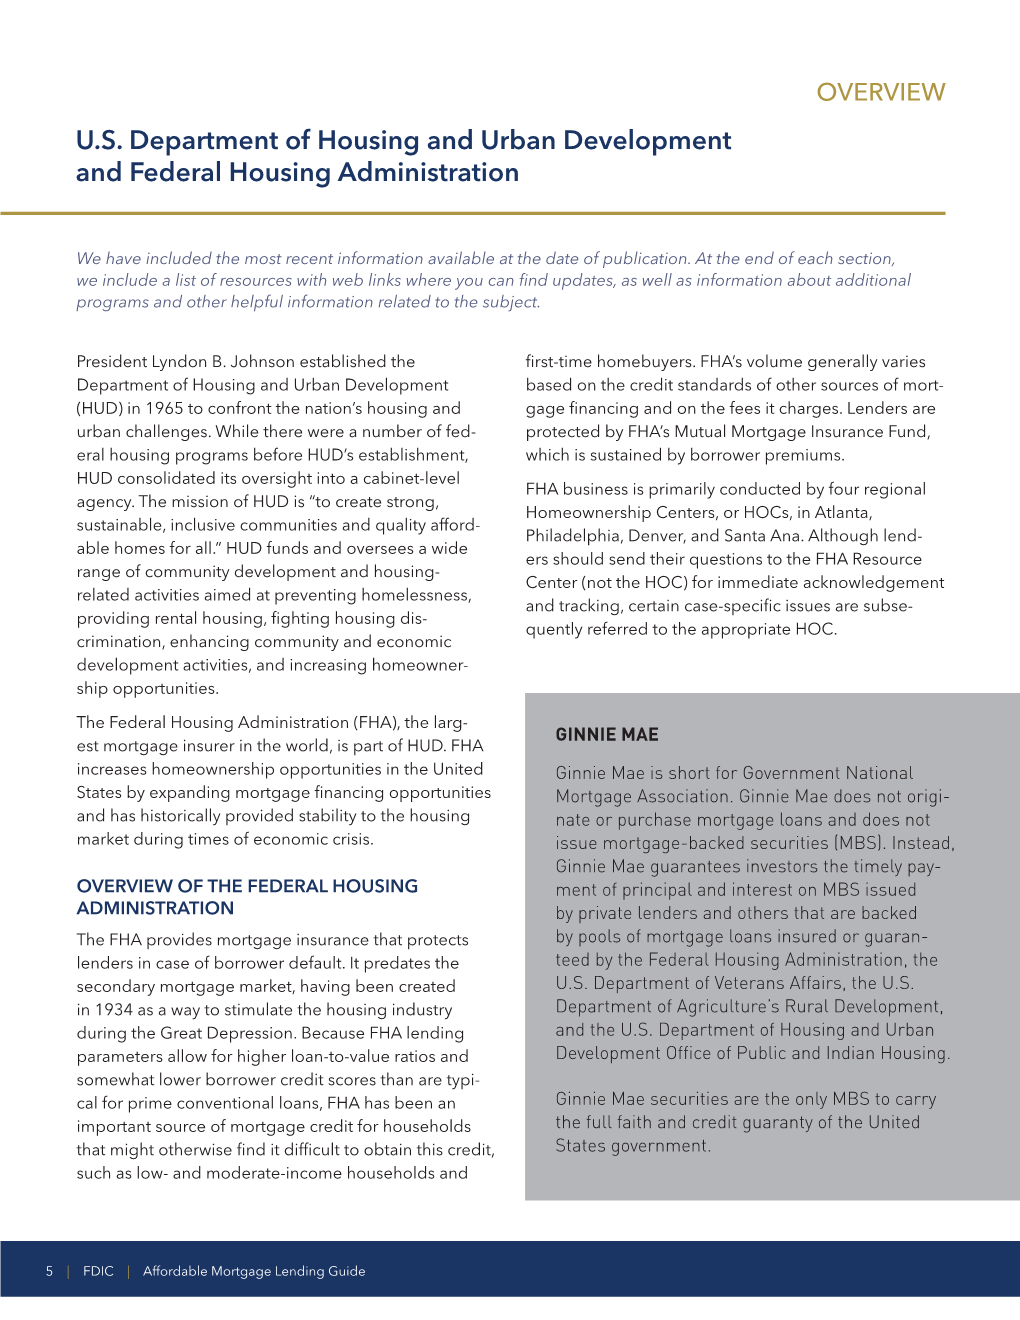 U.S. Department of Housing and Urban Development and Federal Housing Administration